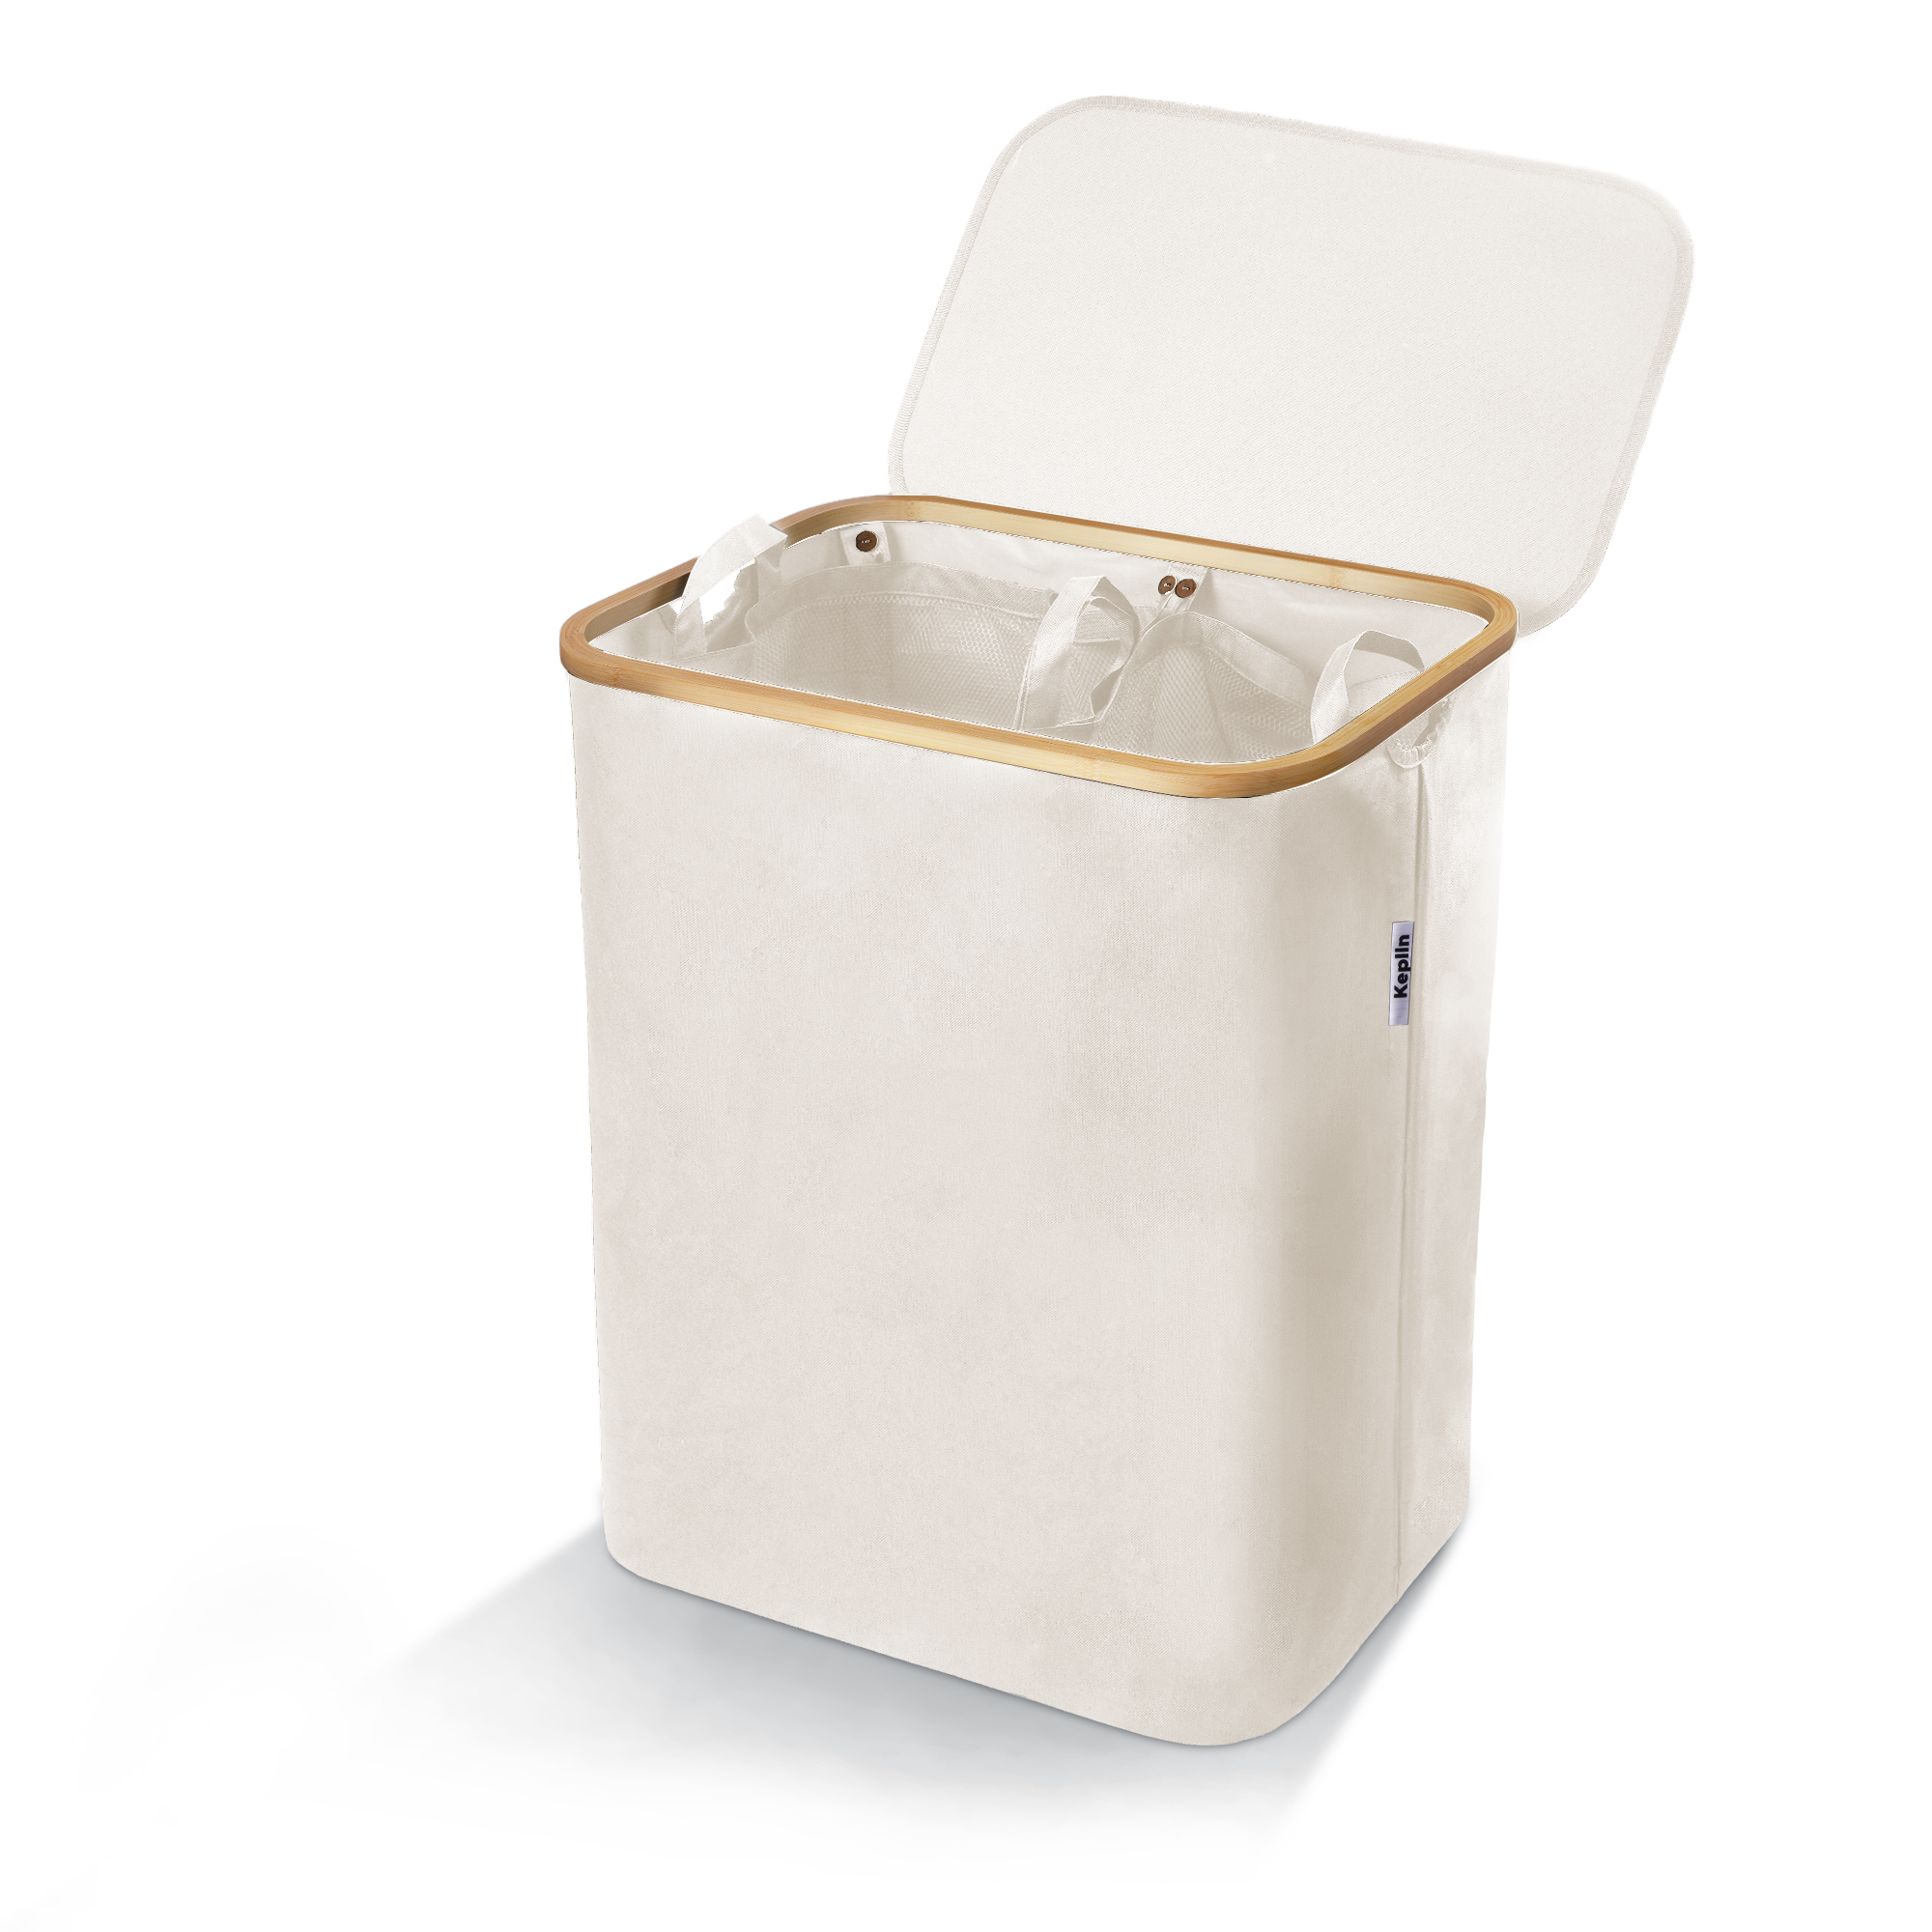 Laundry Basket - 145L Capacity with Handles and Machine Washable Removable Bags